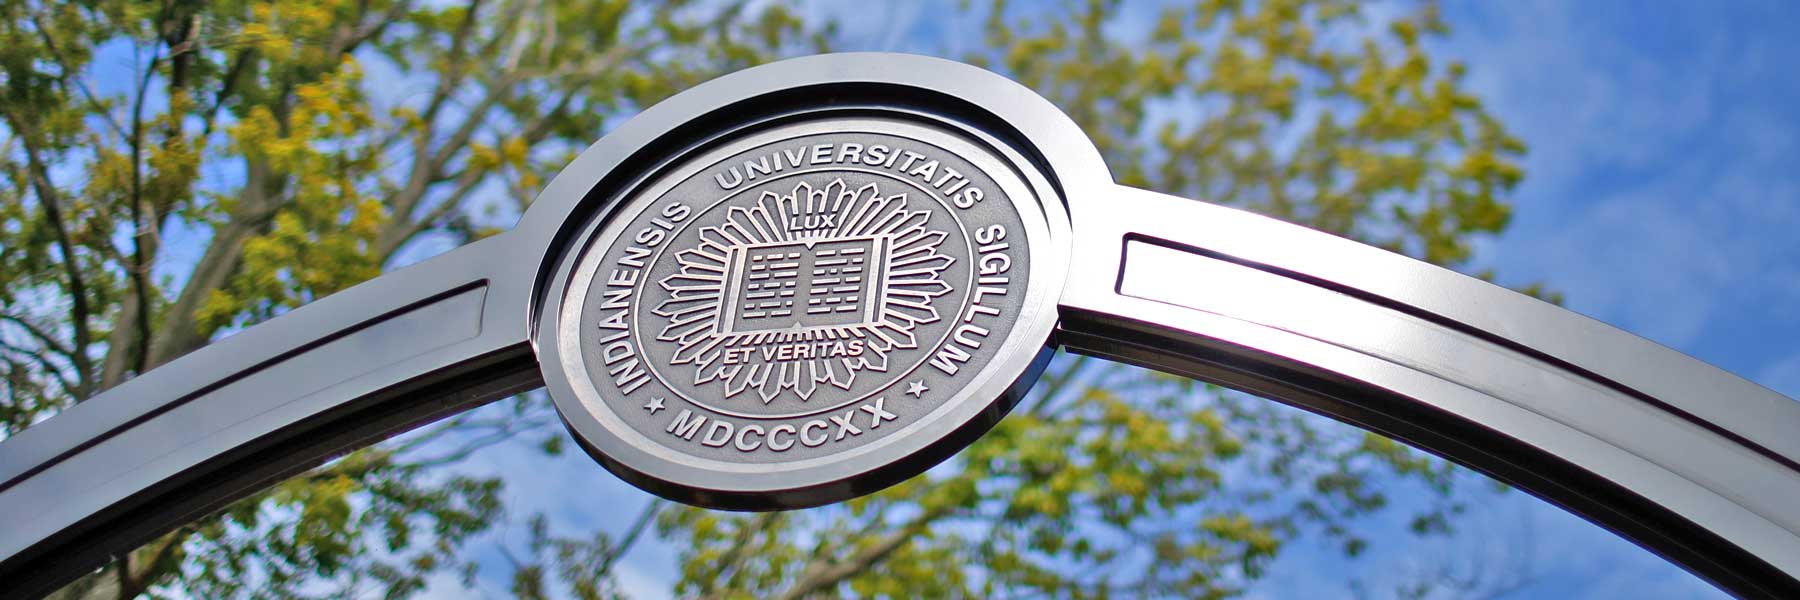 An IU seal crowns an arched gateway entrance to the Bloomington campus